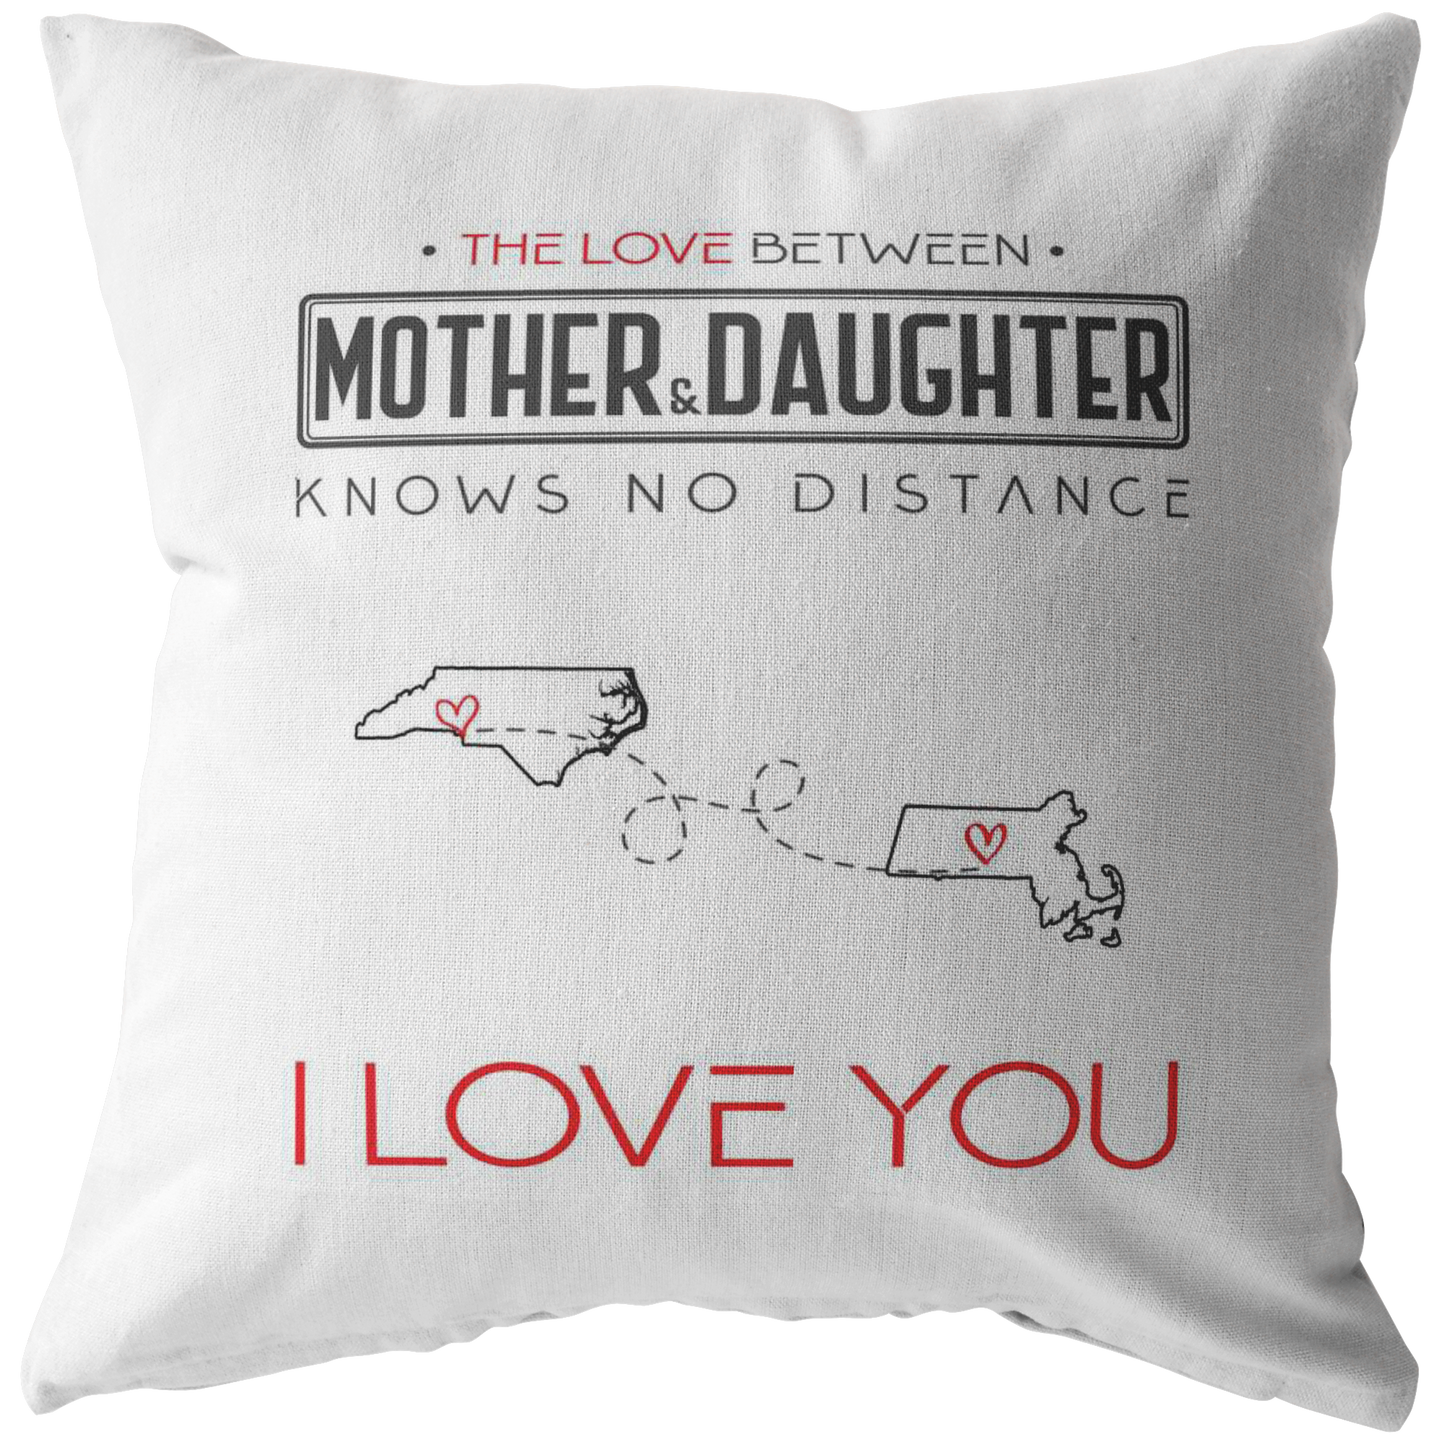 ND-PL21408301-sp-23739 - [ North Carolina | Massachusetts ]Mothers Day Gifts From Daughter - The Love Between Mother A